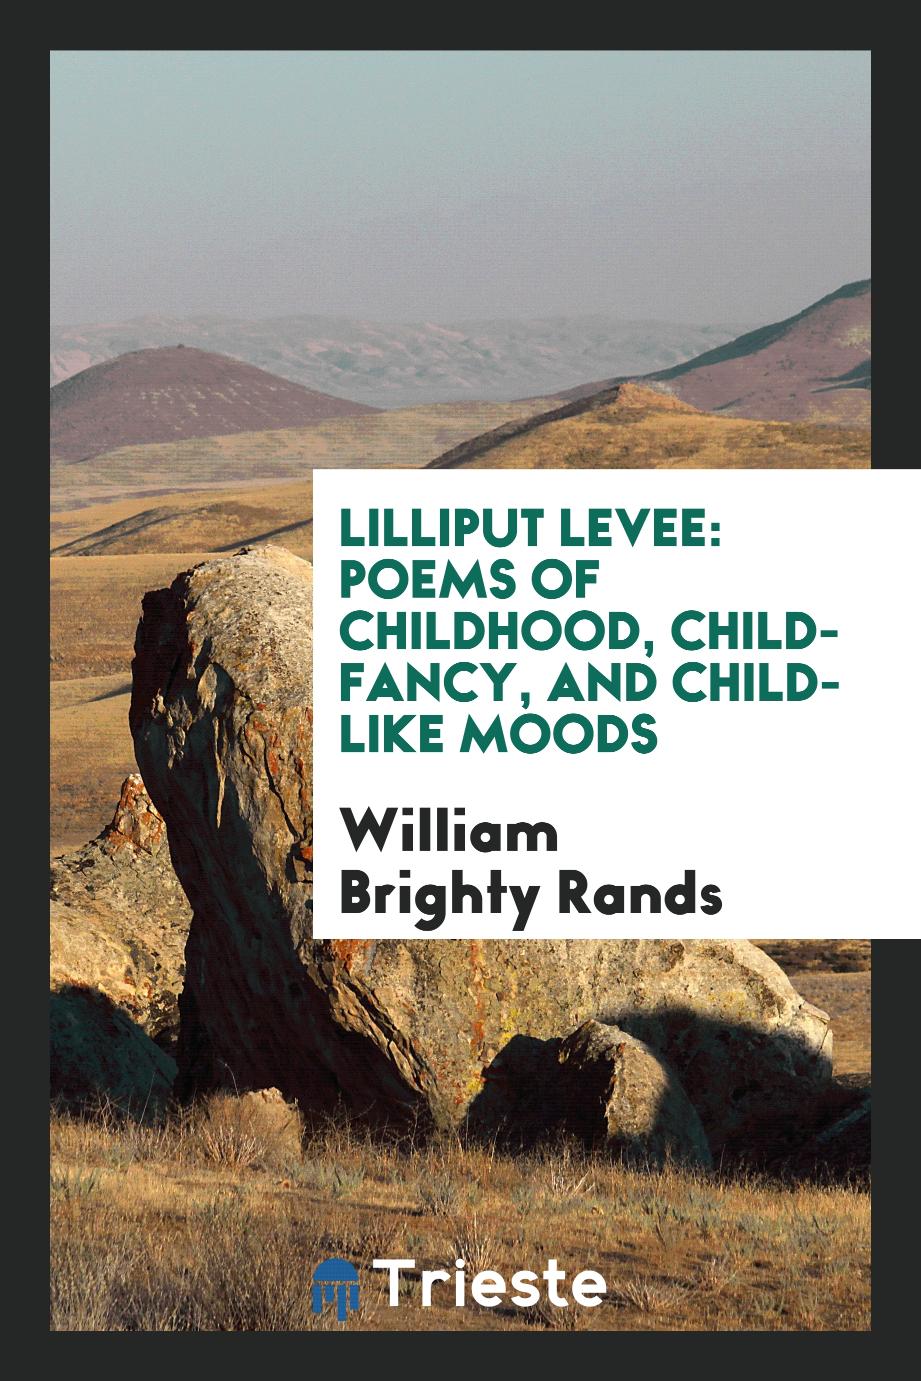 Lilliput Levee: Poems of Childhood, Child-Fancy, and Child-Like Moods